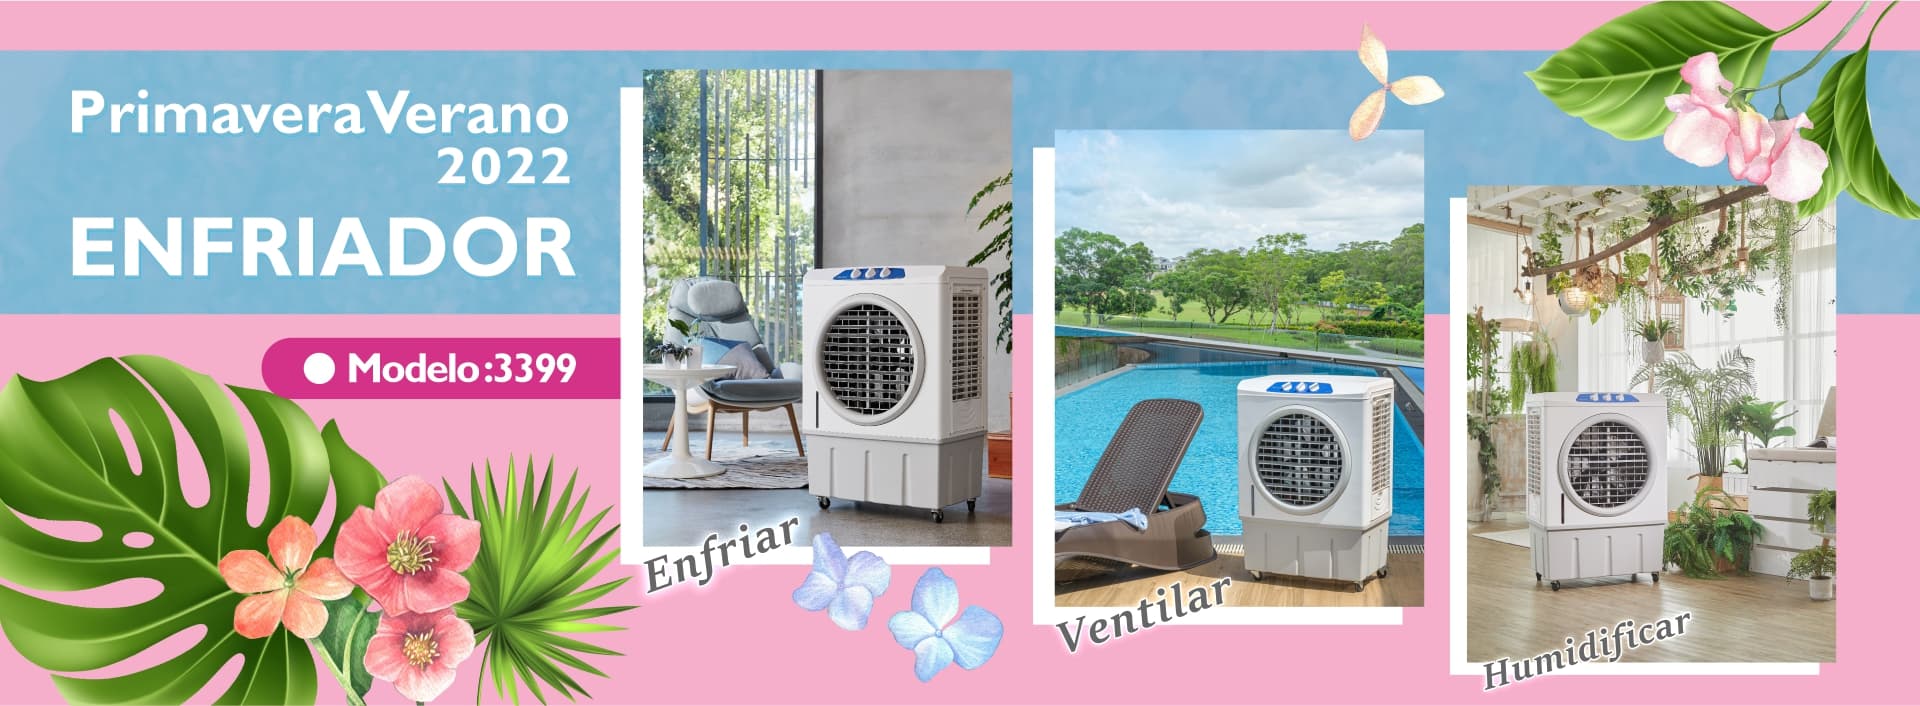 Mytek | Specialized in fan, evaporative cooler and toy